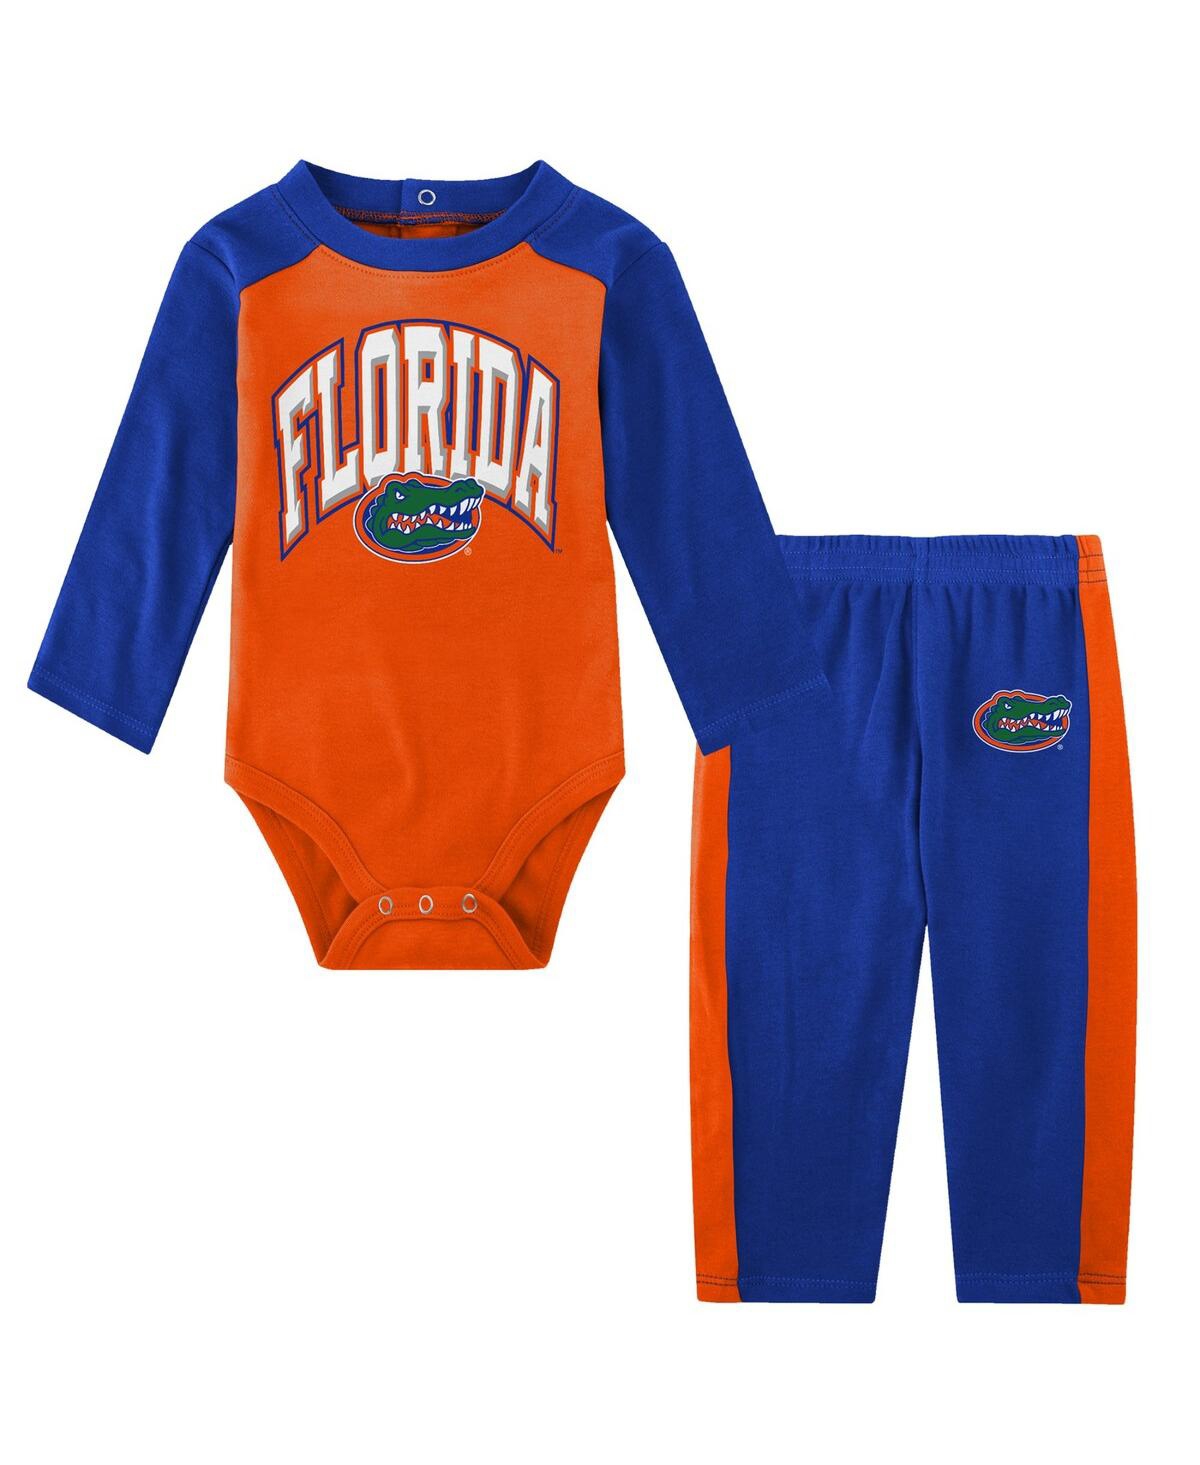 Outerstuff Babies' Infant Boys And Girls Royal Florida Gators Rookie Of The Year Long Sleeve Bodysuit And Pants Set